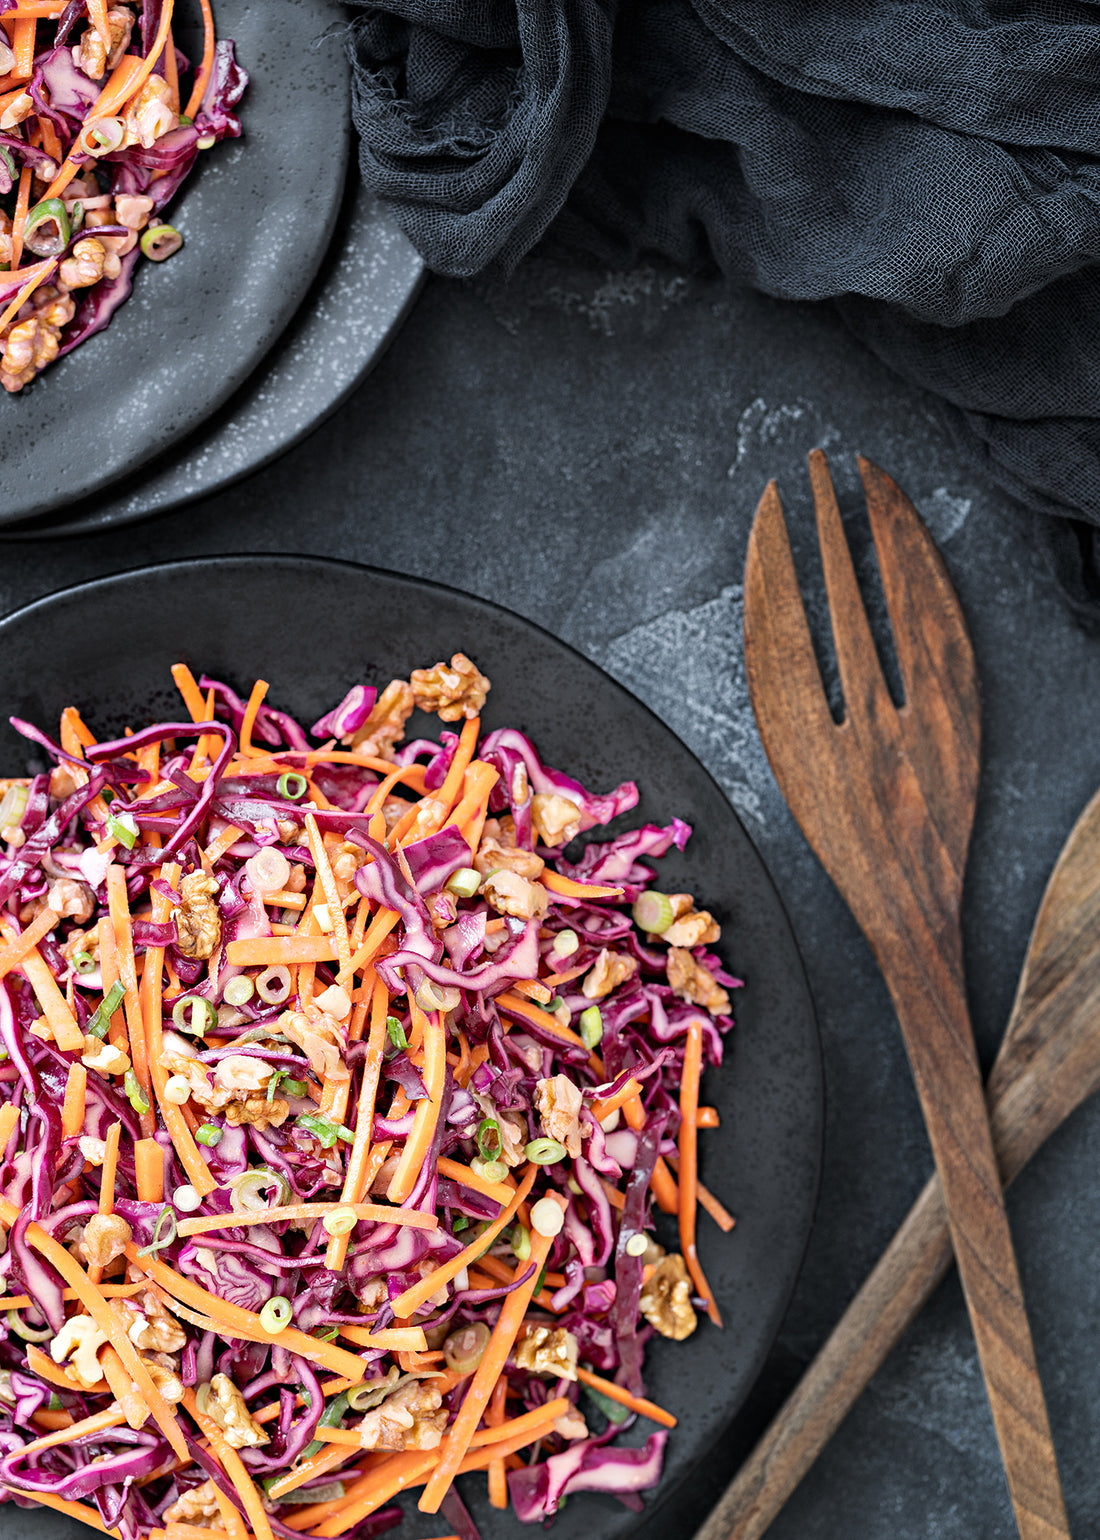 PCOS-Friendly Red Cabbage Coleslaw